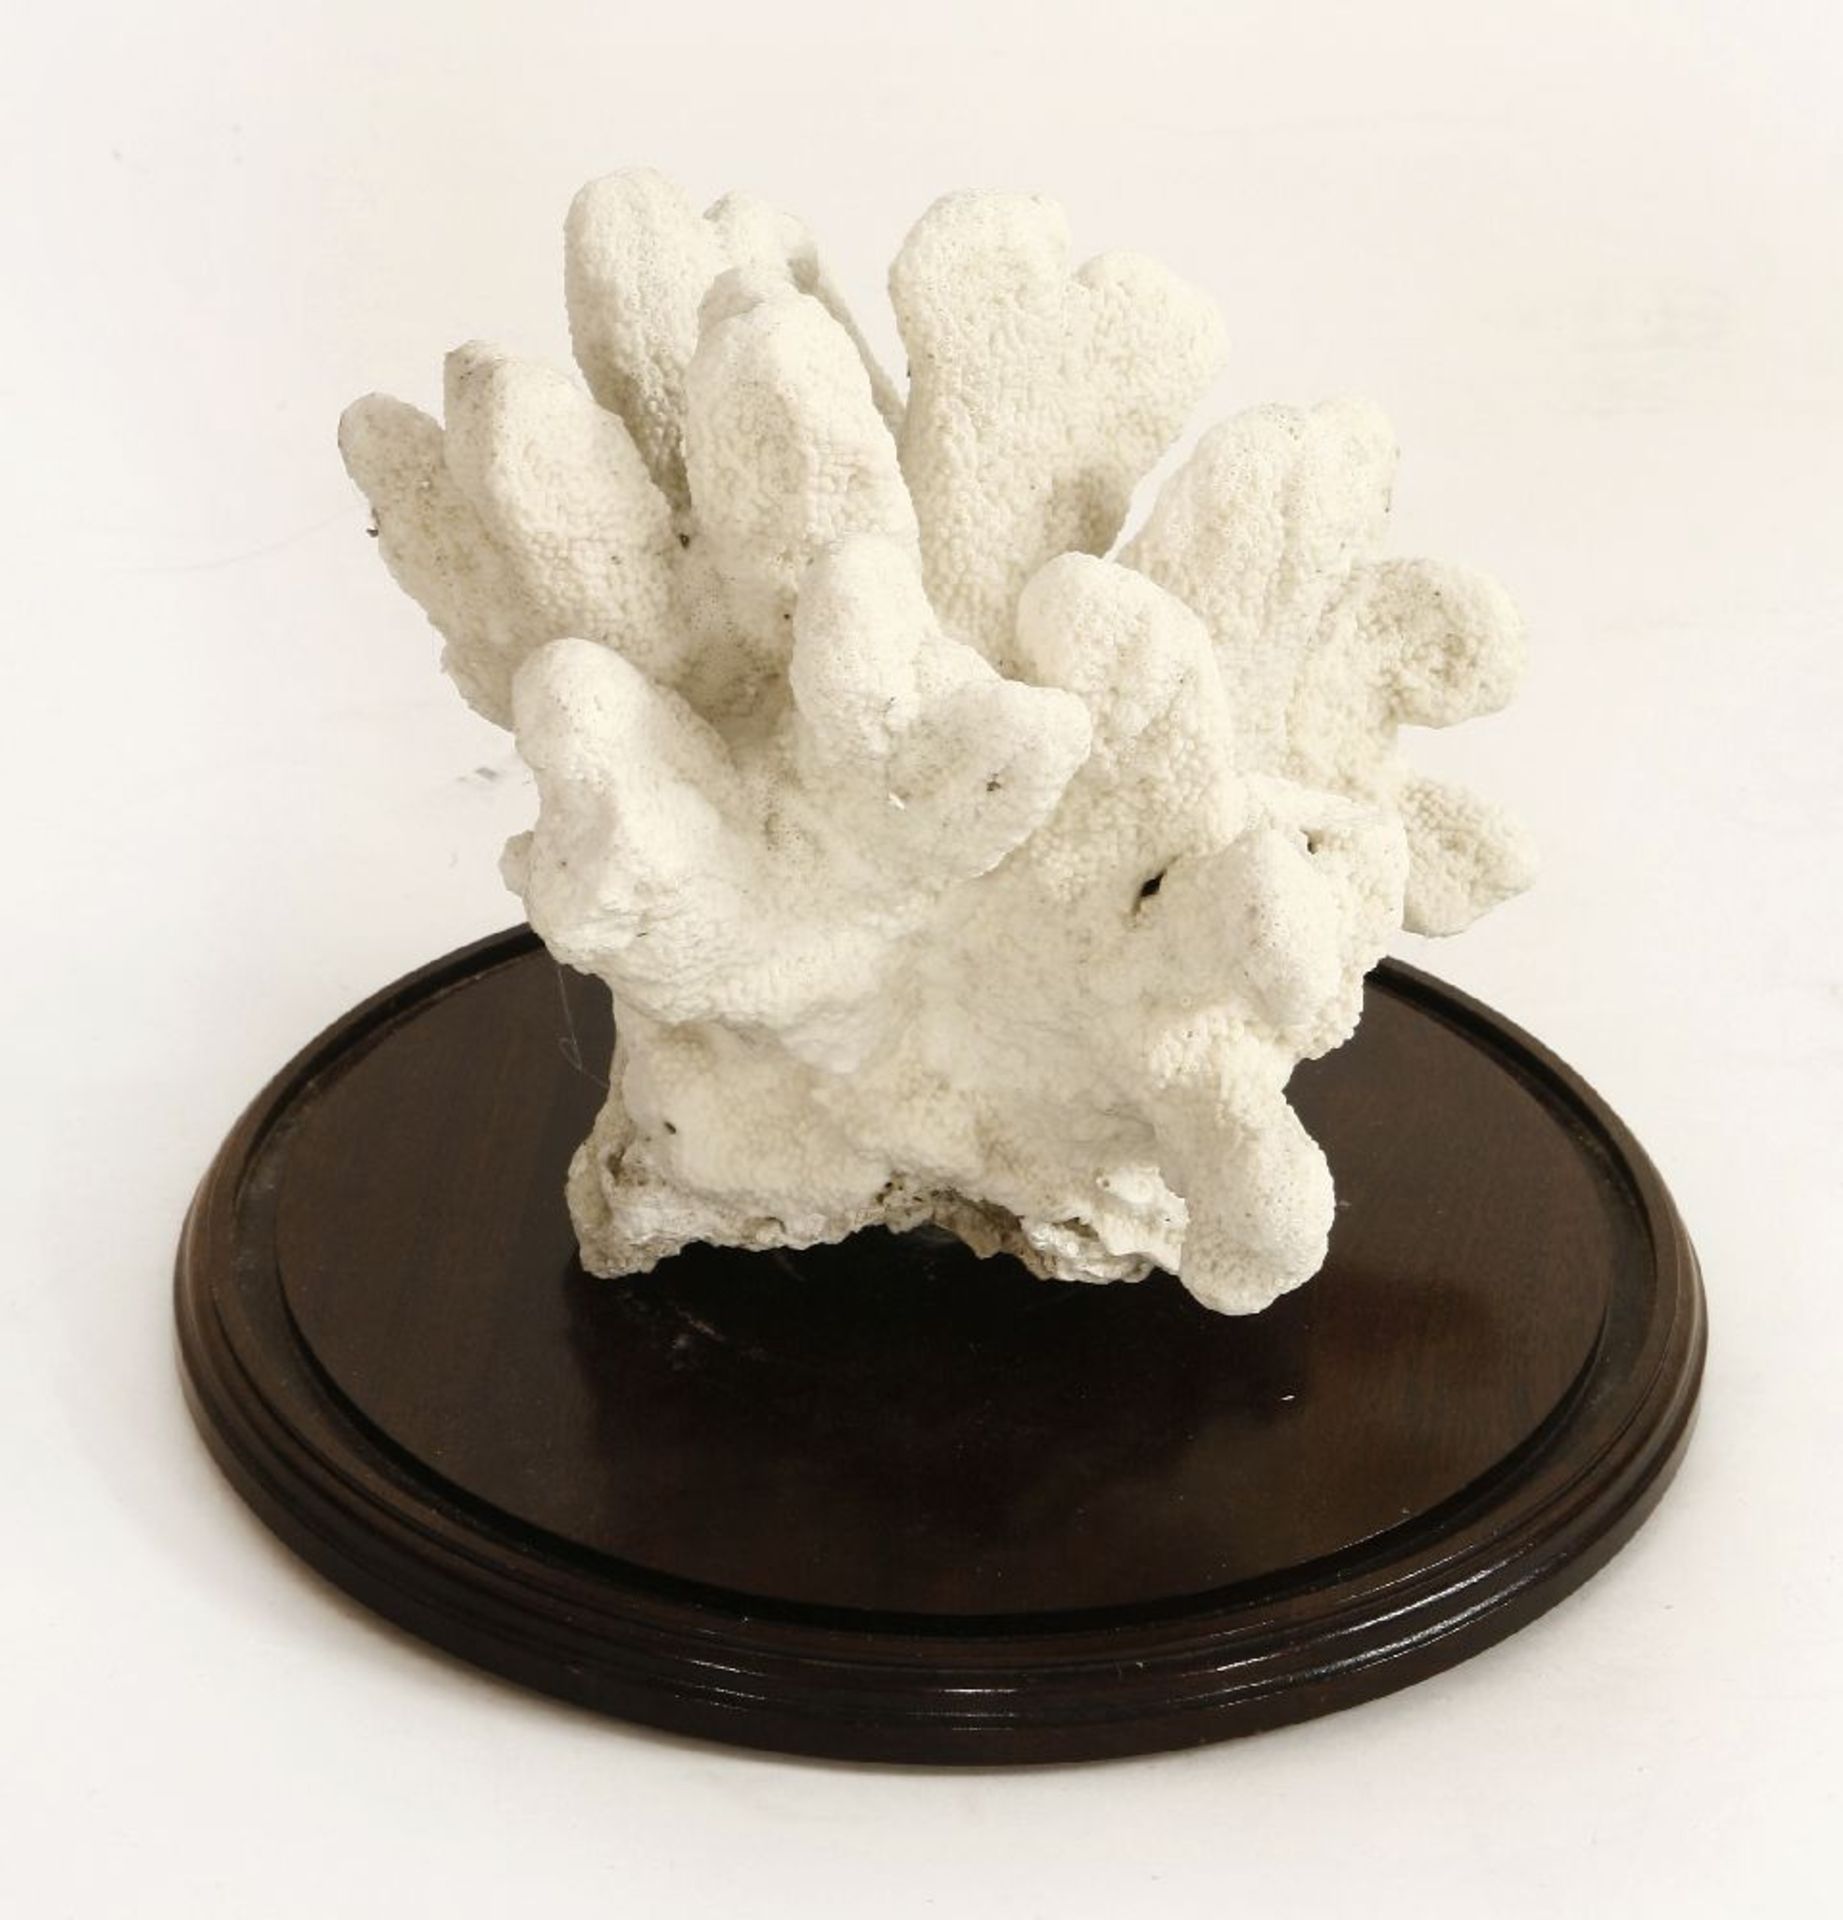 A CORAL SPECIMEN, ¨early 20th century, a large piece of white coral mounted in a Victorian glass